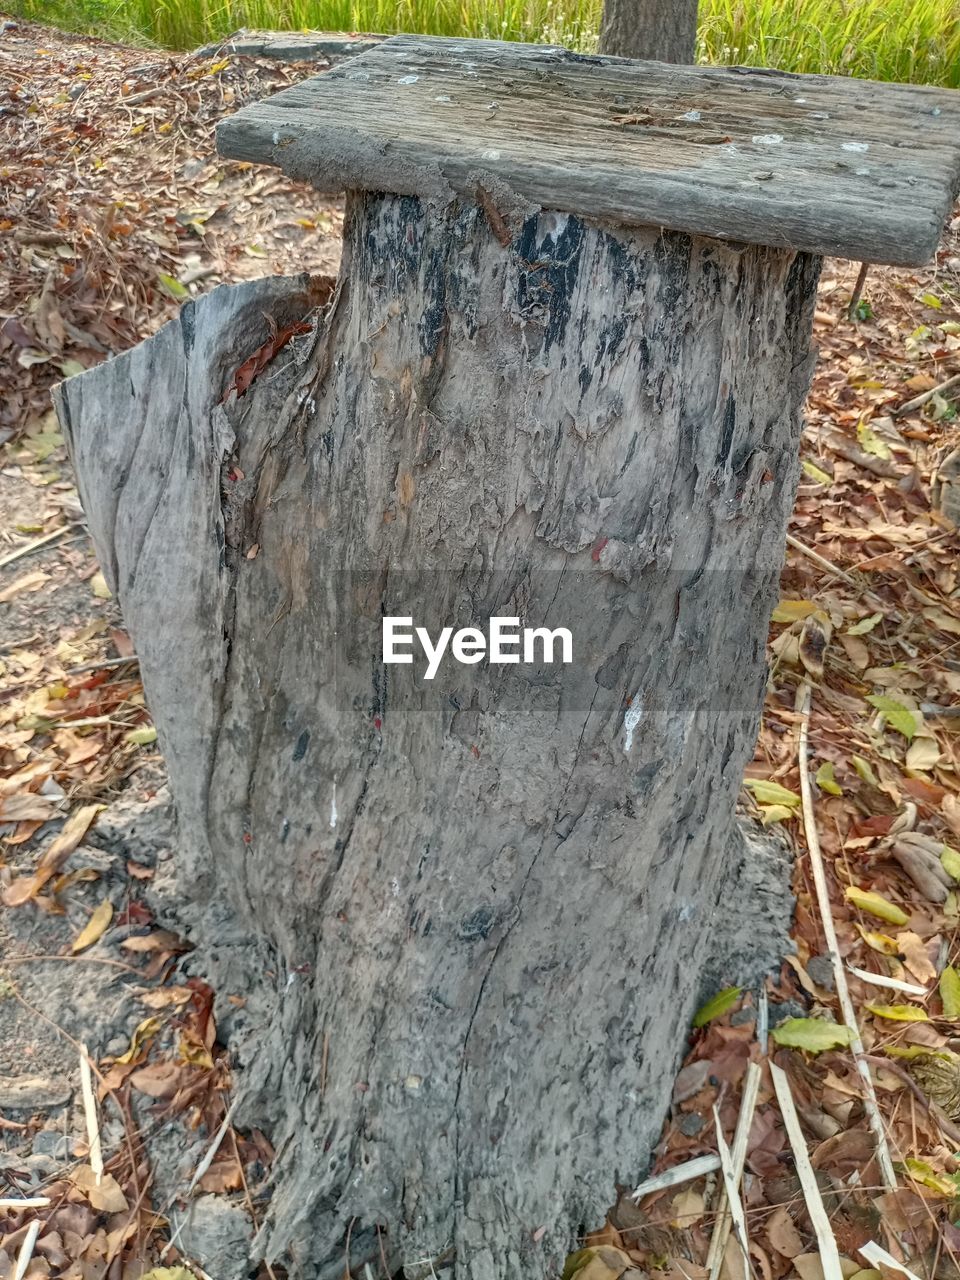 CLOSE-UP OF TREE STUMP IN FOREST